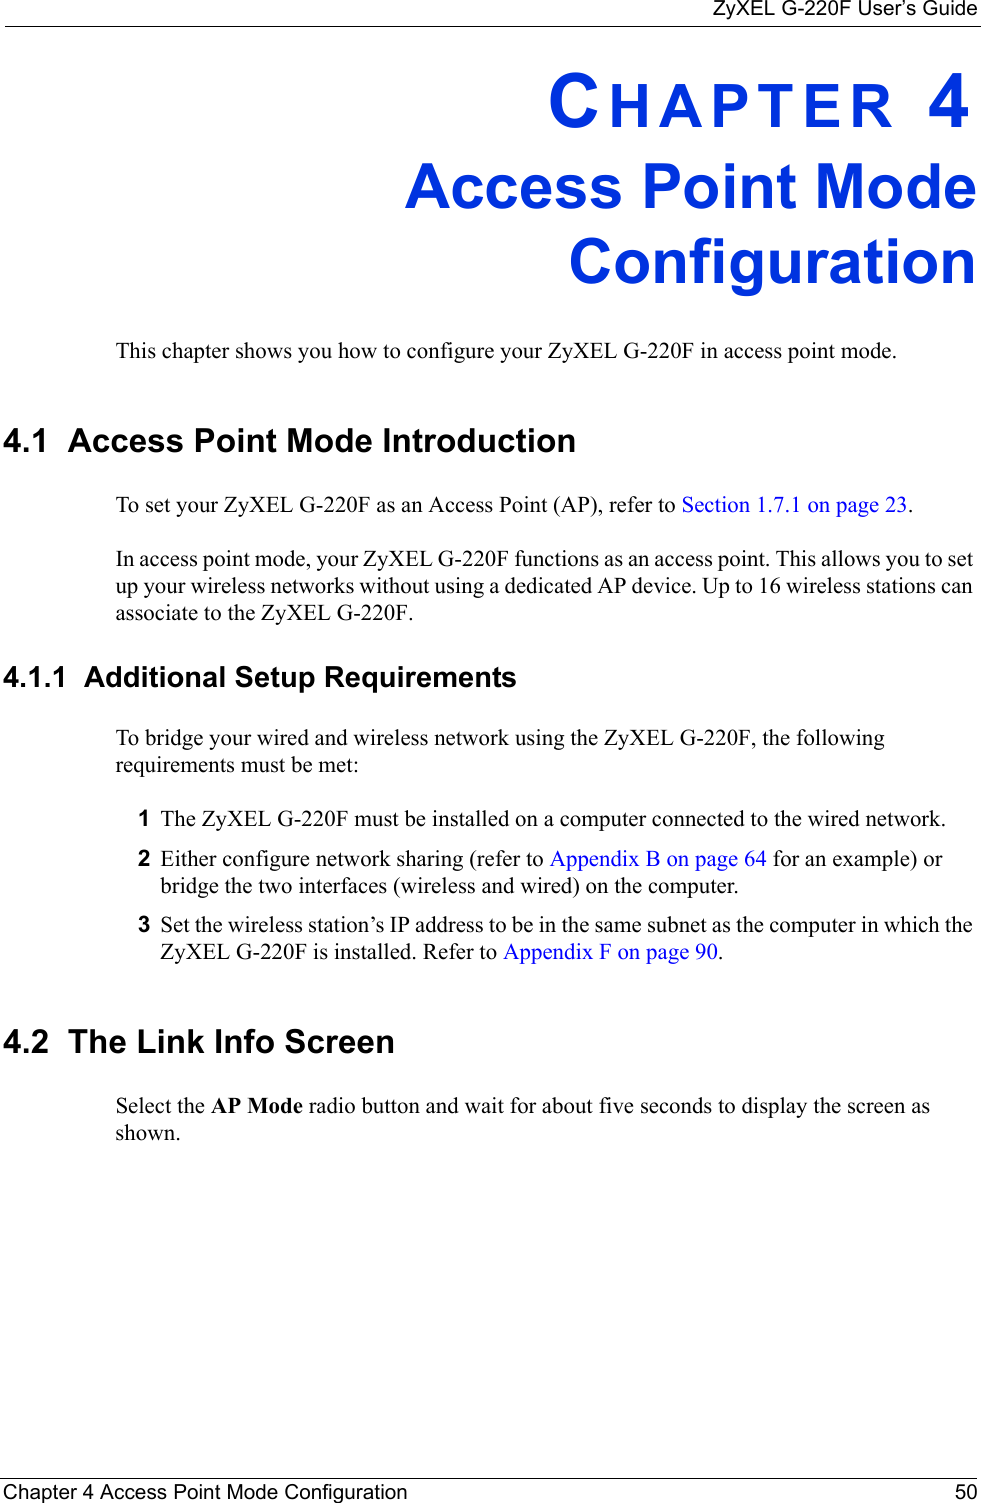 ZyXEL G-220F User’s GuideChapter 4 Access Point Mode Configuration 50CHAPTER 4Access Point ModeConfigurationThis chapter shows you how to configure your ZyXEL G-220F in access point mode.4.1  Access Point Mode Introduction To set your ZyXEL G-220F as an Access Point (AP), refer to Section 1.7.1 on page 23.In access point mode, your ZyXEL G-220F functions as an access point. This allows you to set up your wireless networks without using a dedicated AP device. Up to 16 wireless stations can associate to the ZyXEL G-220F.4.1.1  Additional Setup RequirementsTo bridge your wired and wireless network using the ZyXEL G-220F, the following requirements must be met:1The ZyXEL G-220F must be installed on a computer connected to the wired network.2Either configure network sharing (refer to Appendix B on page 64 for an example) or bridge the two interfaces (wireless and wired) on the computer.3Set the wireless station’s IP address to be in the same subnet as the computer in which the ZyXEL G-220F is installed. Refer to Appendix F on page 90.4.2  The Link Info Screen Select the AP Mode radio button and wait for about five seconds to display the screen as shown.